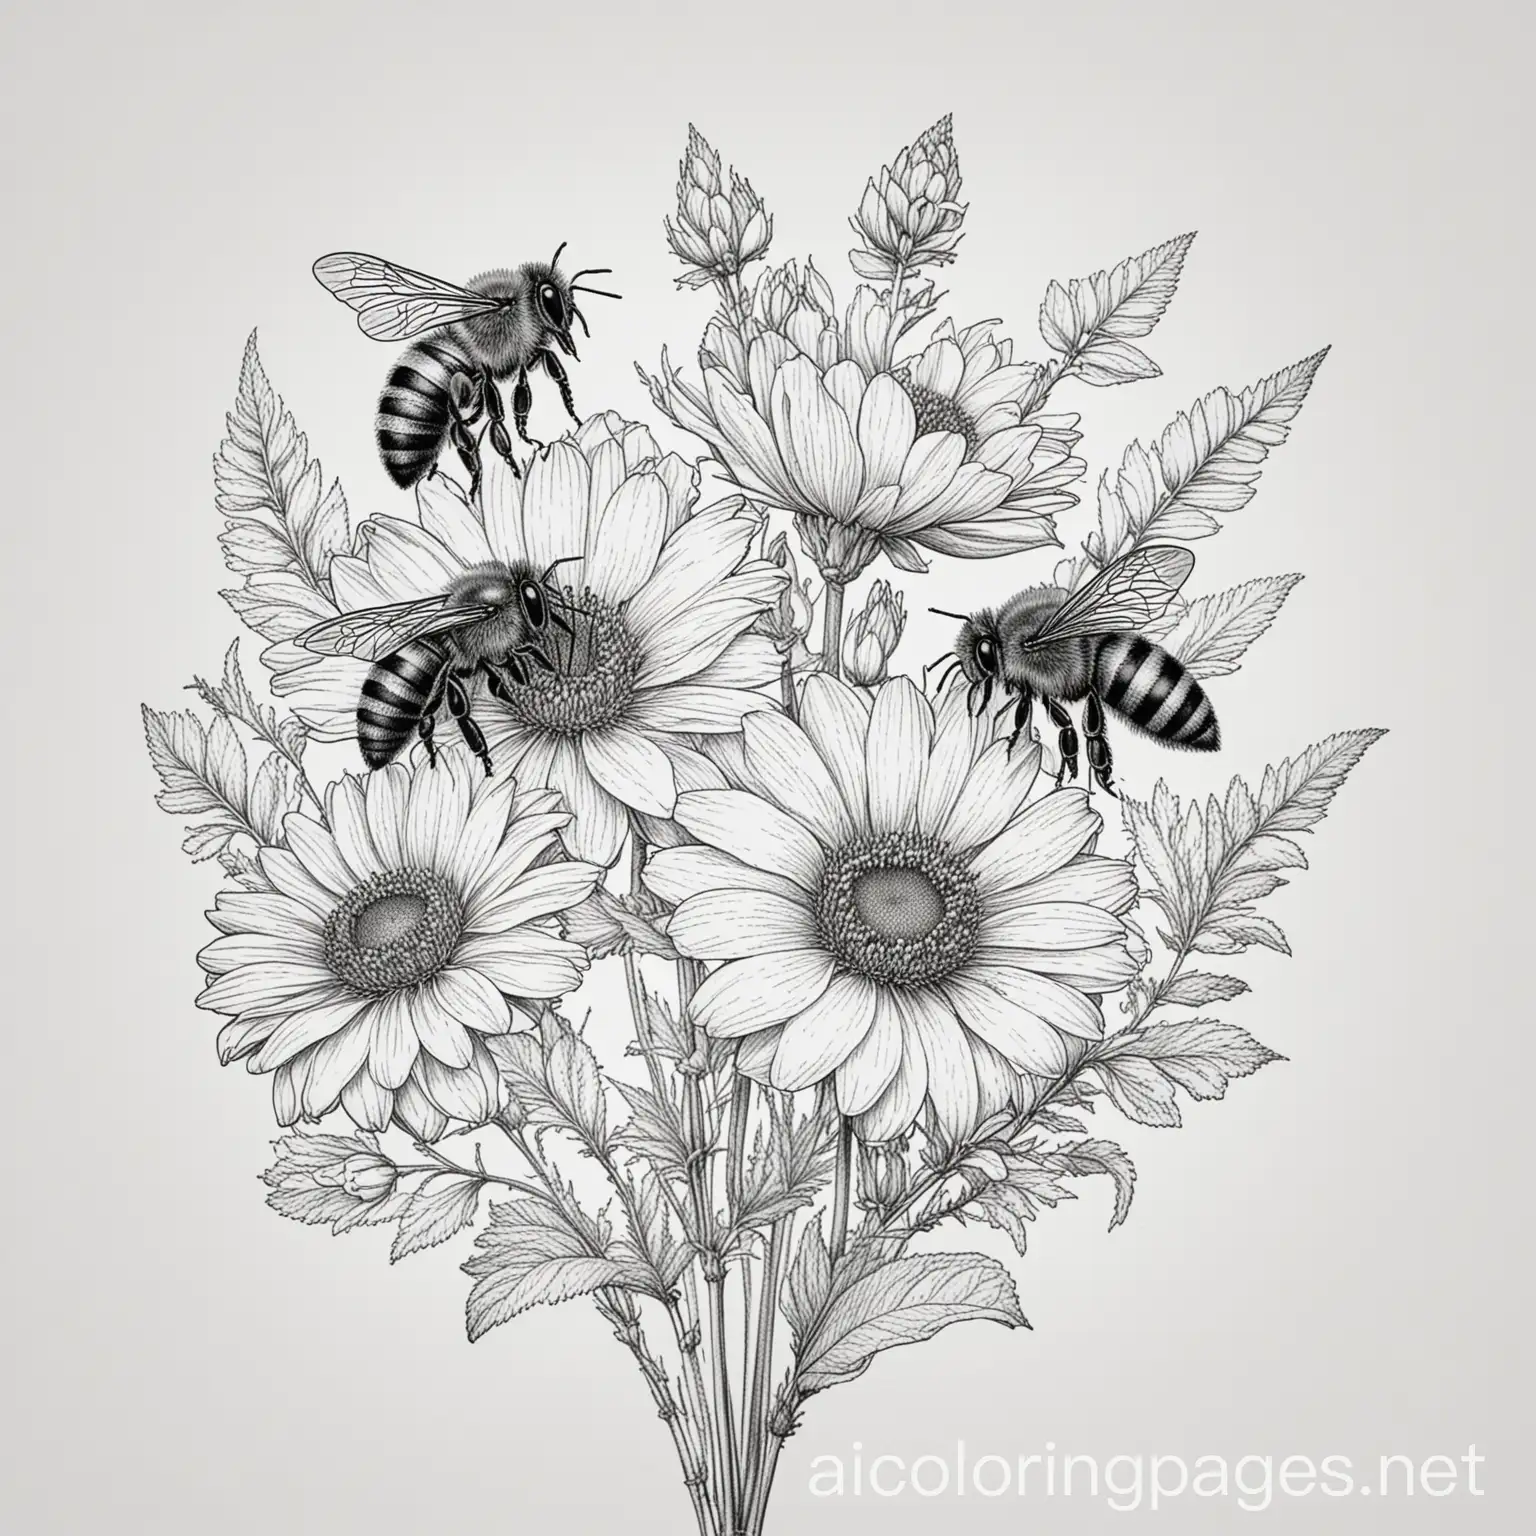 Bees-on-Flower-Coloring-Page-Line-Drawing-with-Simplicity-and-Ample-White-Space